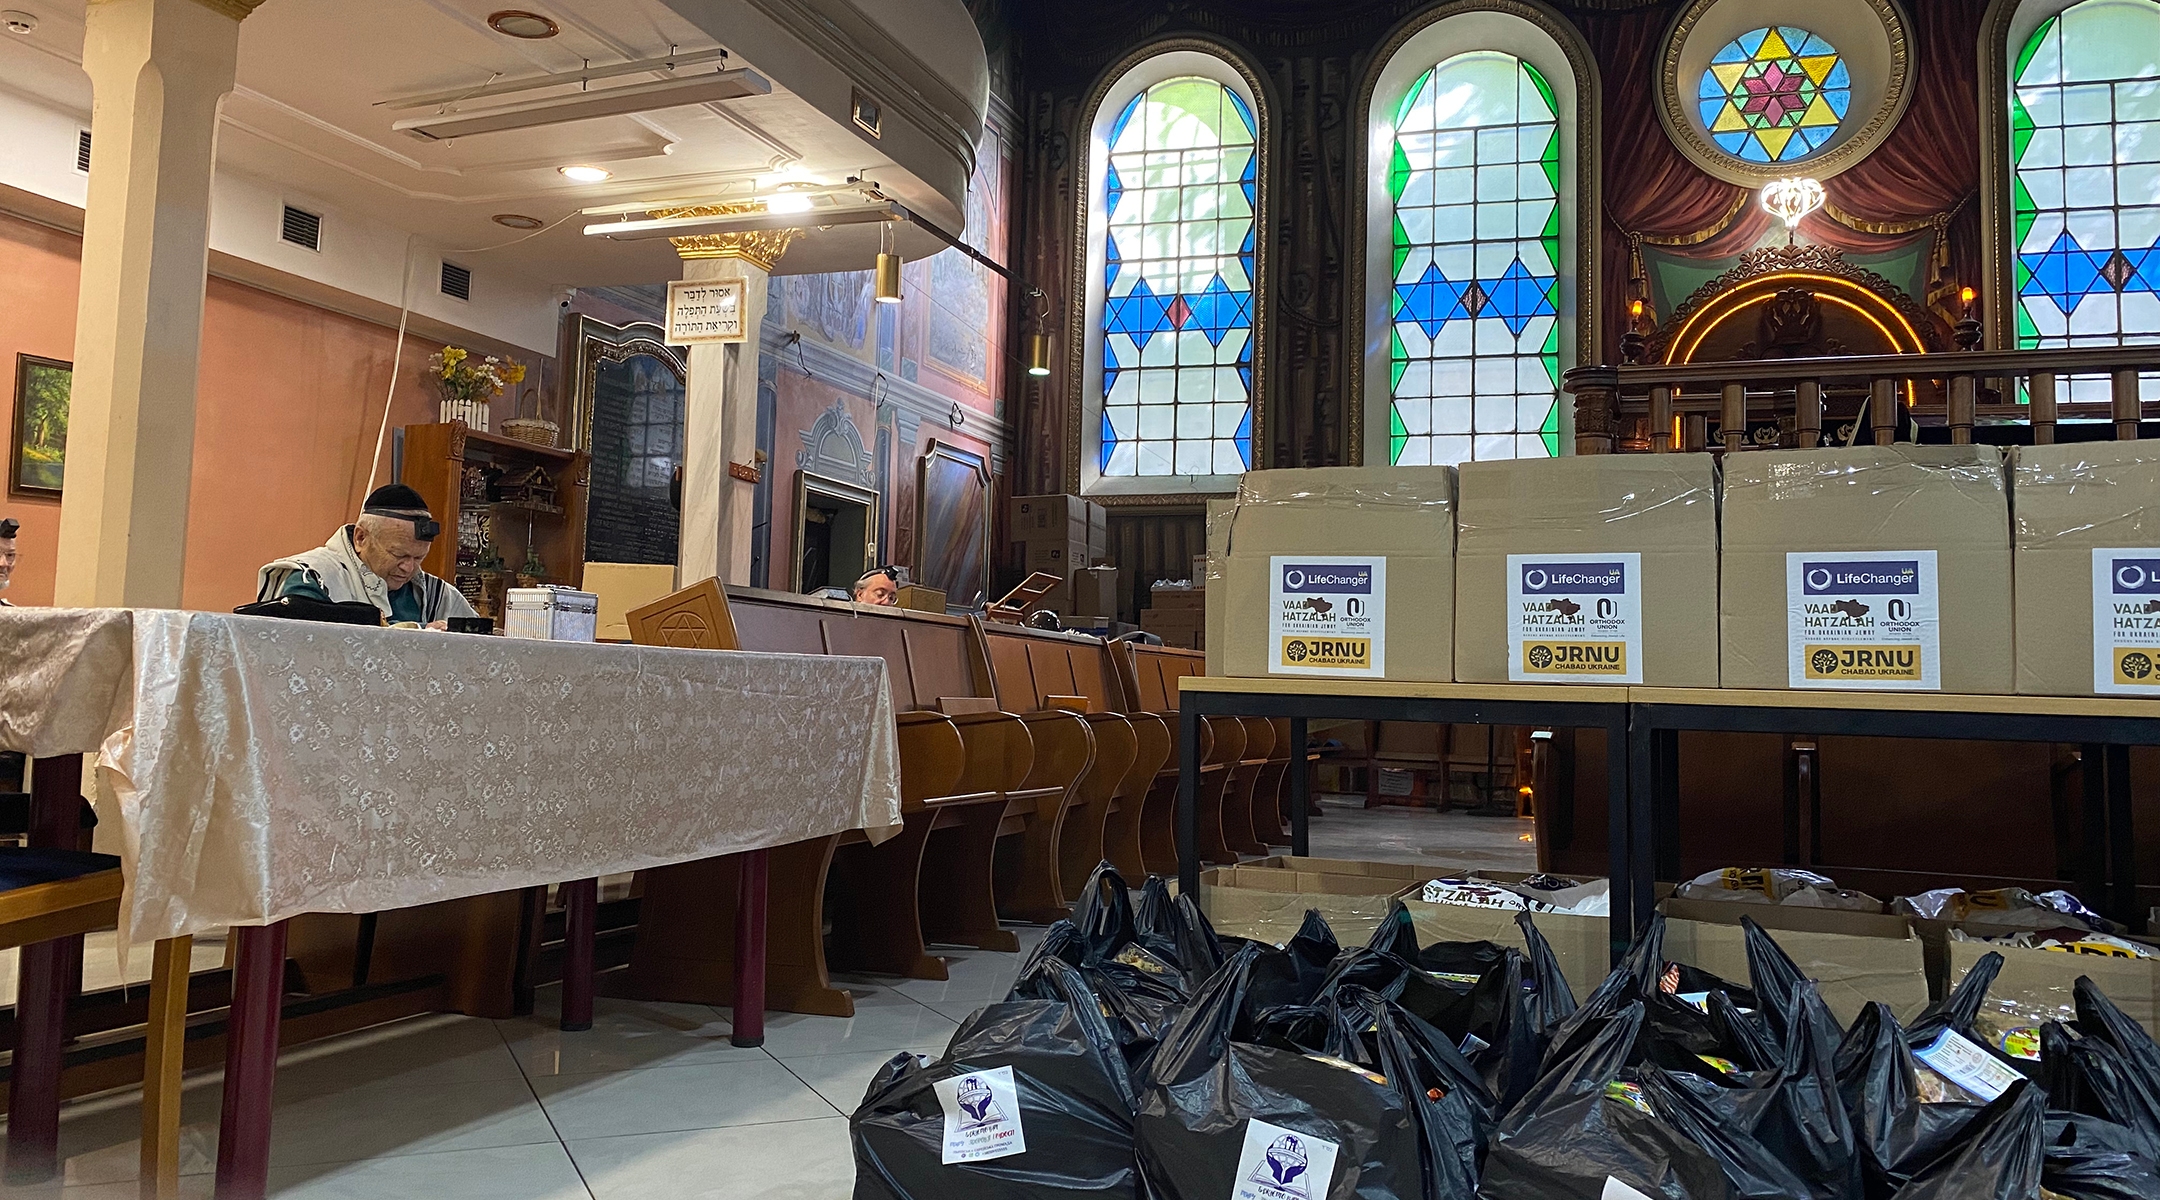 Food parcels, ready to be delivered to Jews in Lviv, are piled up waiting until the end of morning prayers before they can be ferried out to those waiting outside. (Jacob Judah)